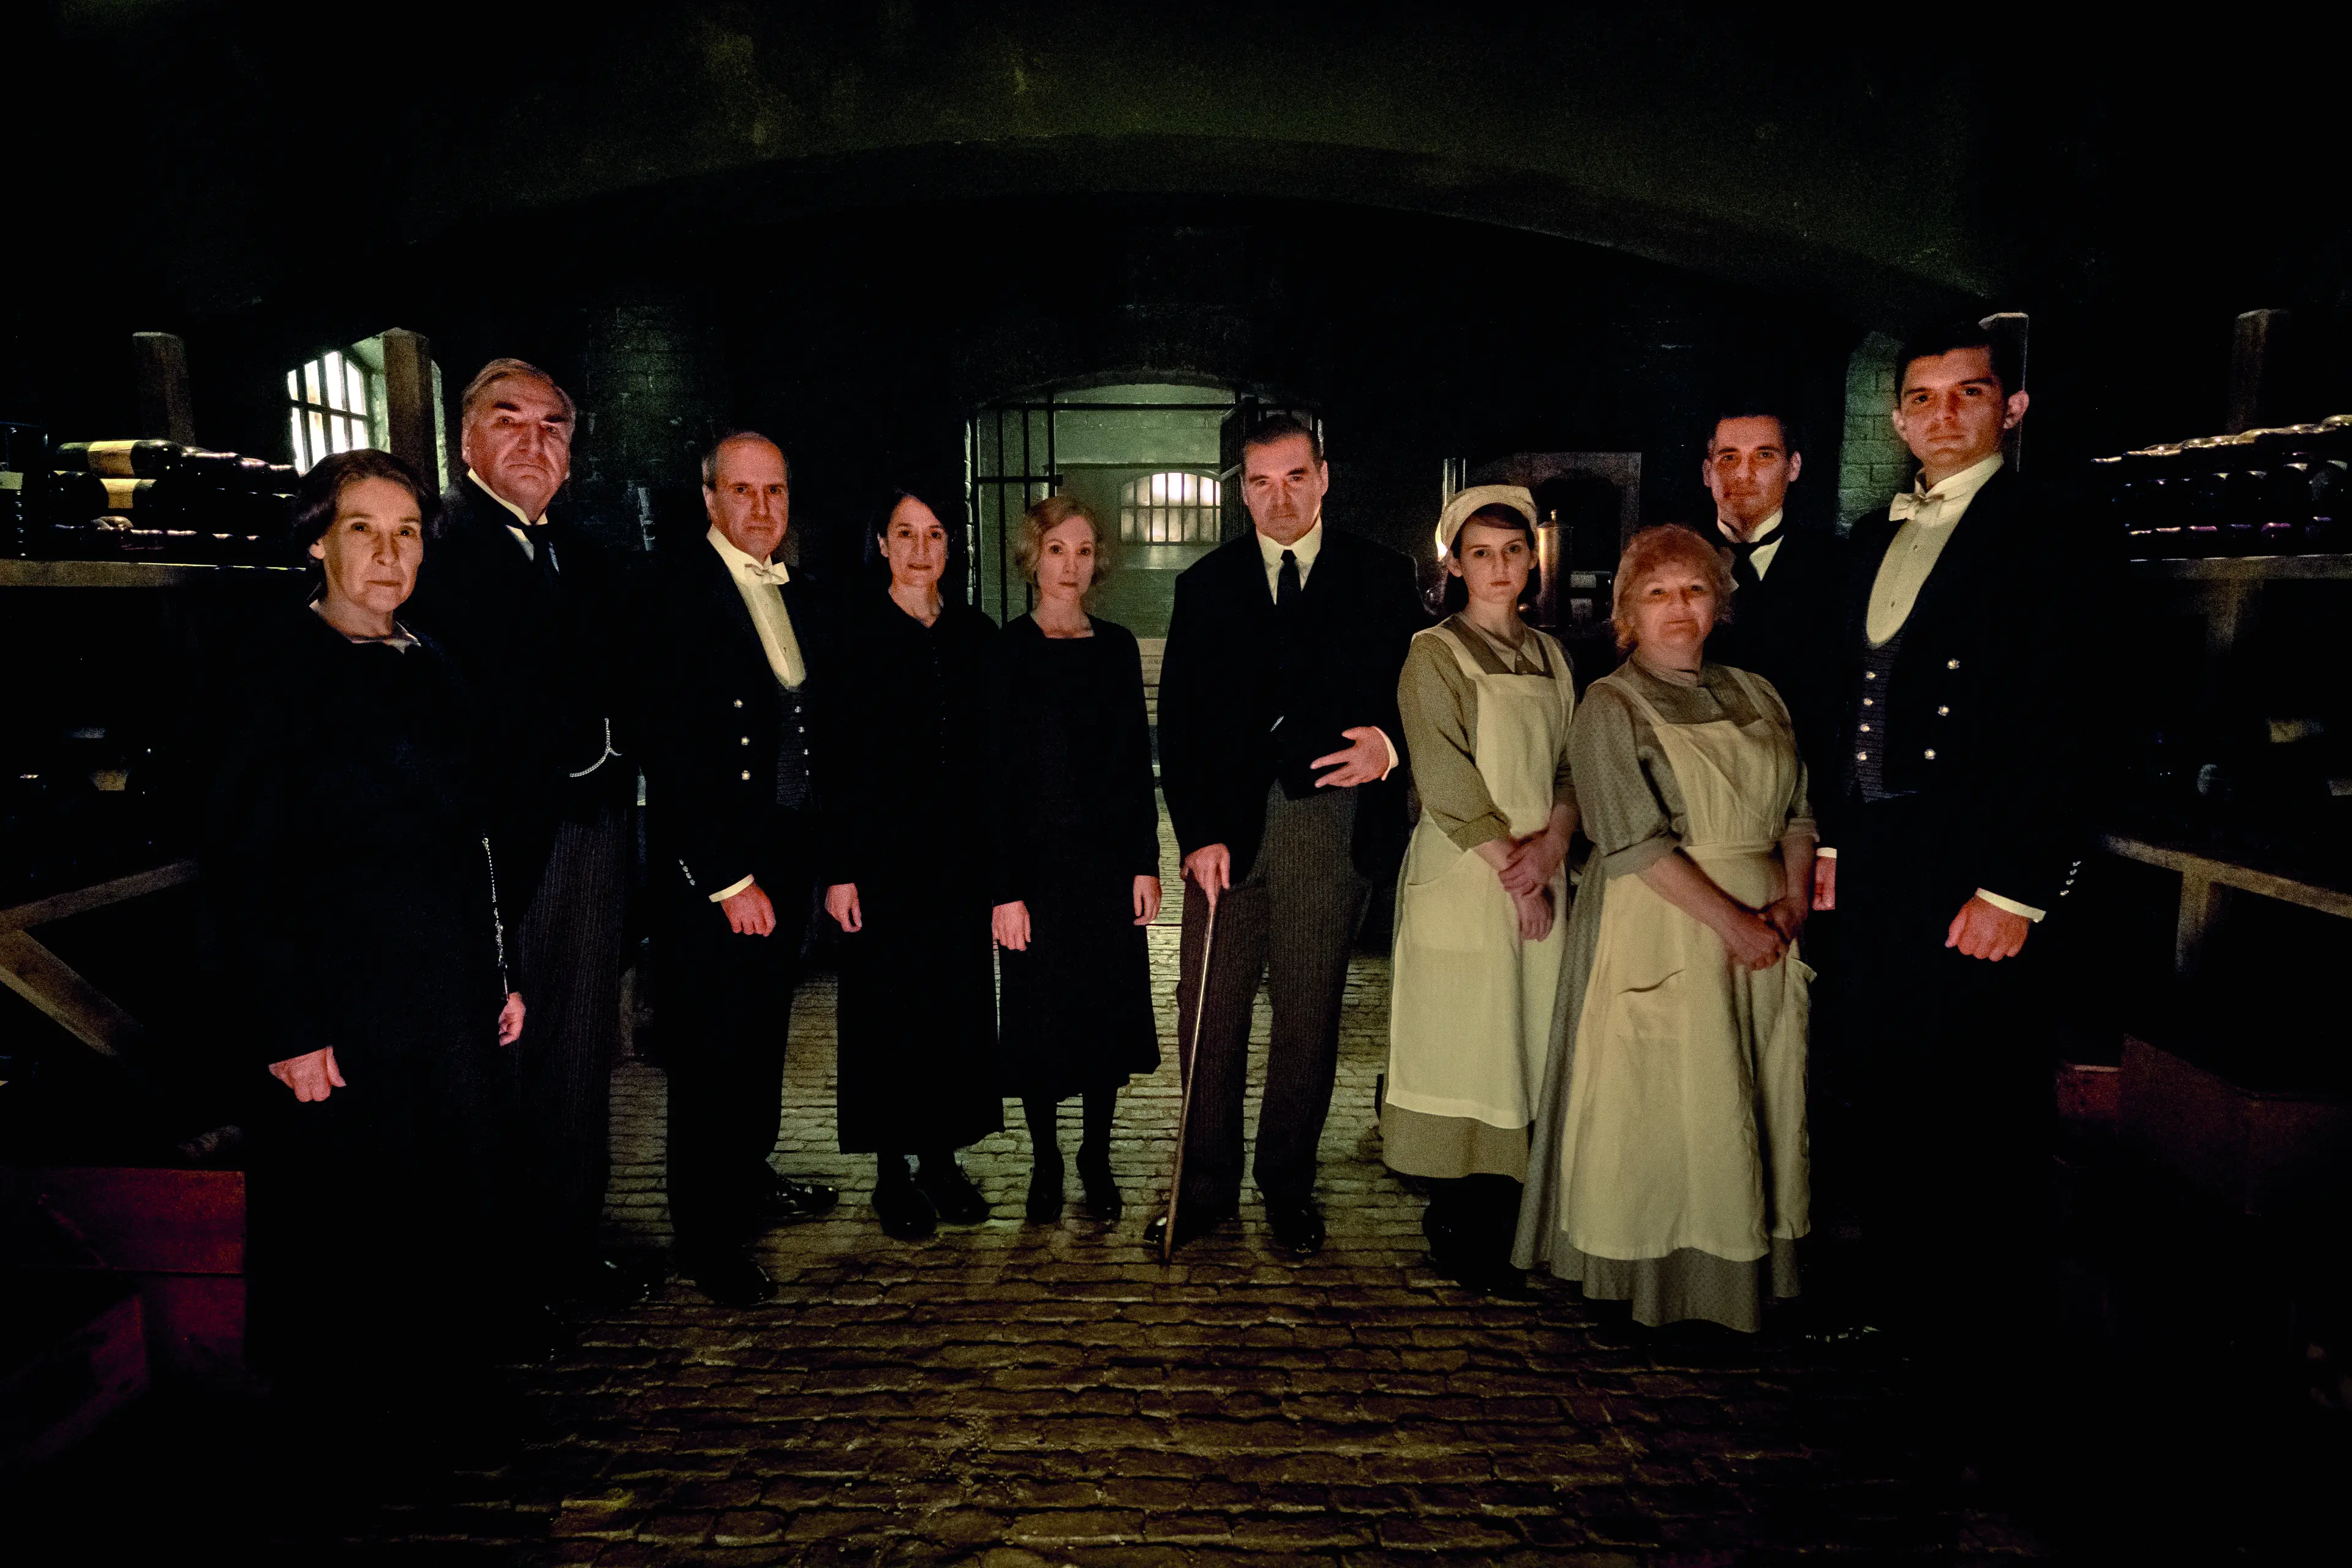 Phyllis Logan stars as Mrs. Hughes, Jim Carter as Mr. Carson, Kevin Doyle as Mr. Molesley, Raquel Cassidy as Miss Baxter, Joanne Froggatt as Anna Bates, Brendan Coyle as Mr. Bates, Sophie McShera as Daisy, Lesley Nicol as Mrs. Patmore, Robert James-Collier as Thomas Barrow and Michael C. Fox as Andy in DOWNTON ABBEY, a Focus Features release.  Credit : Jaap Buitendijk / © 2019 Focus Features, LLC